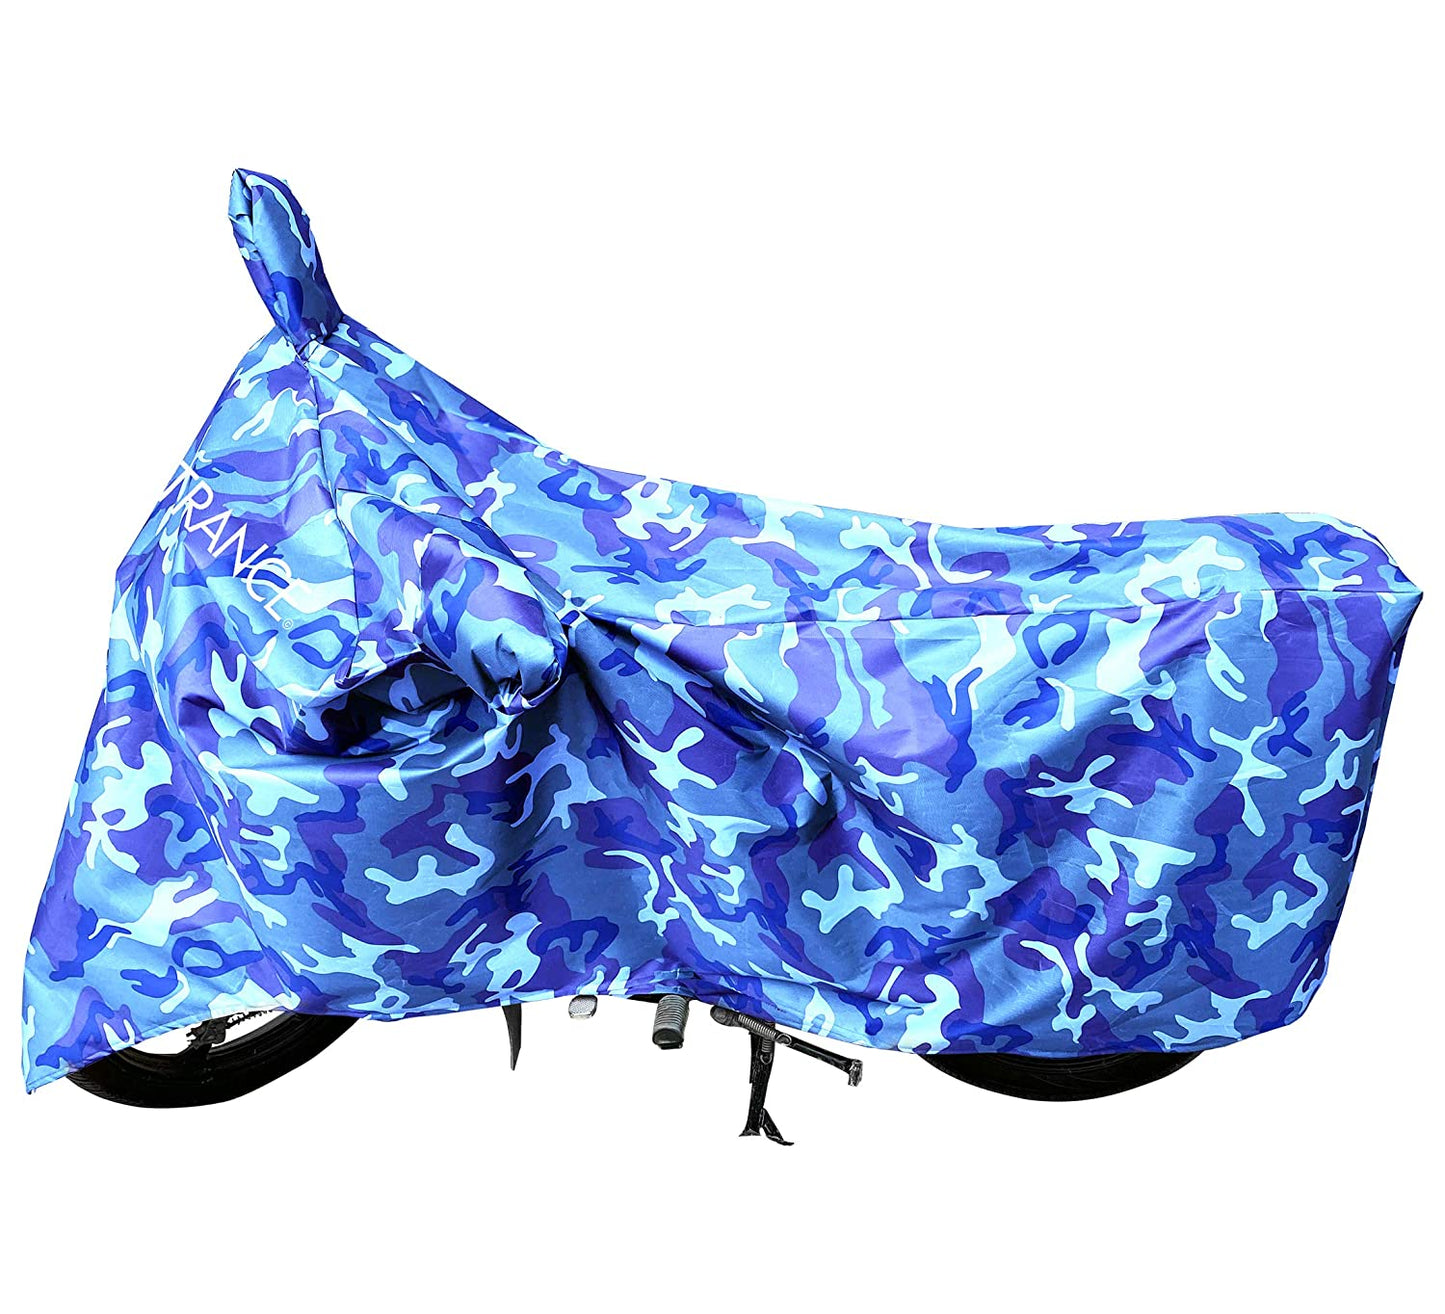 MotoTrance Jungle Bike Body Covers For Honda CB 500 - Interlock-Stitched Waterproof and Heat Resistant with Mirror Pockets